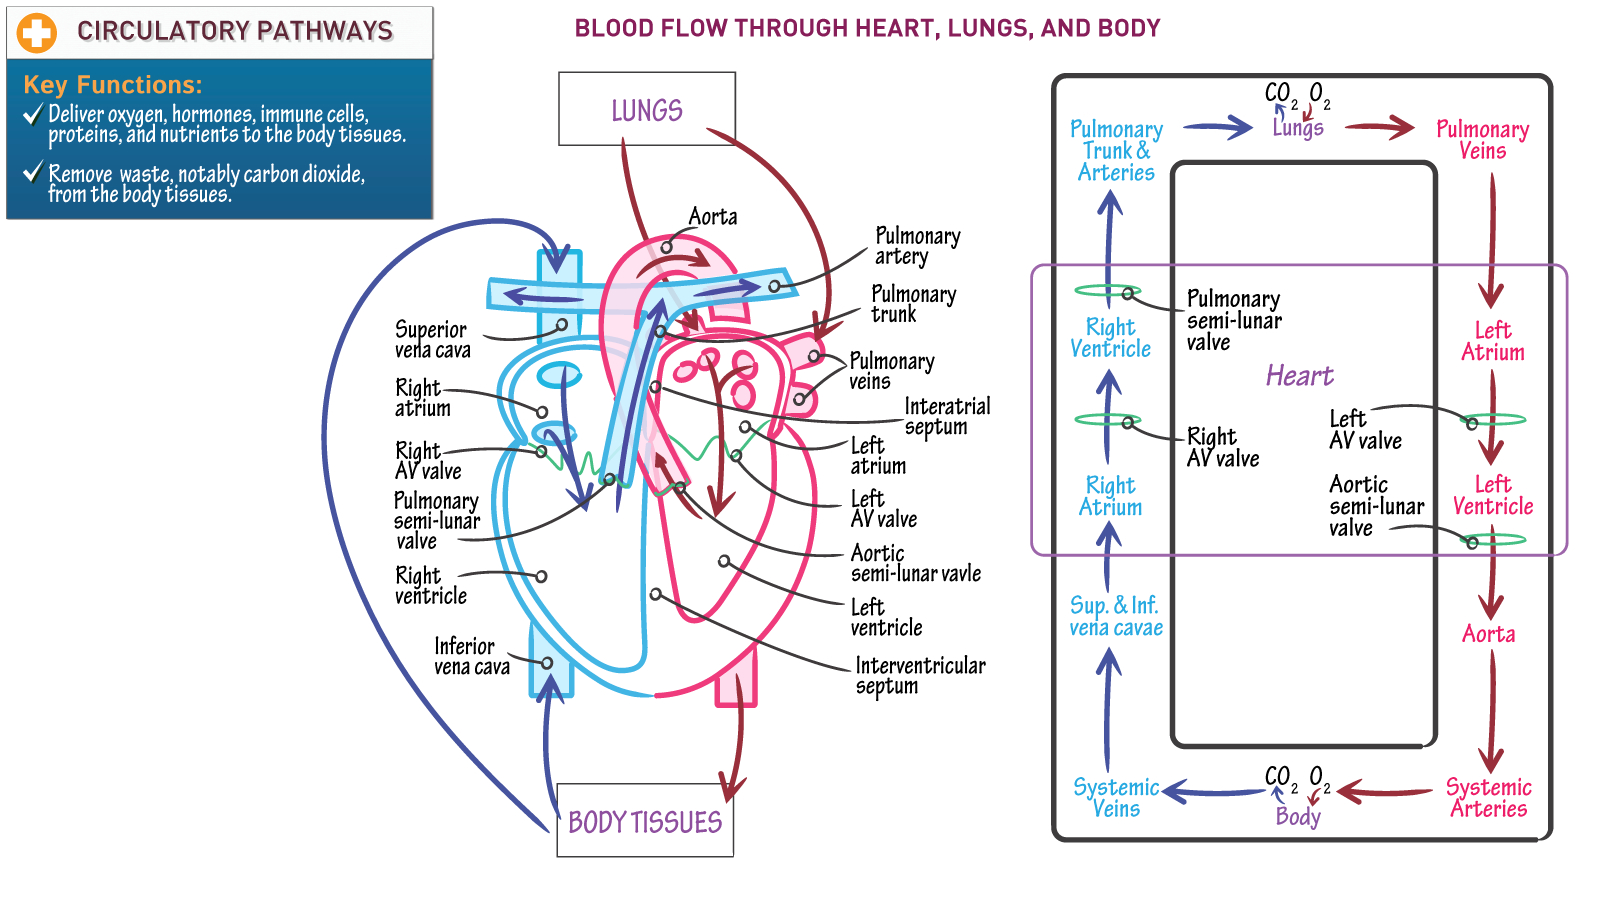 Blood Flow Through The Heart Diagram The Cardiovascular System Blood Flow Through Heart Lungs And Body